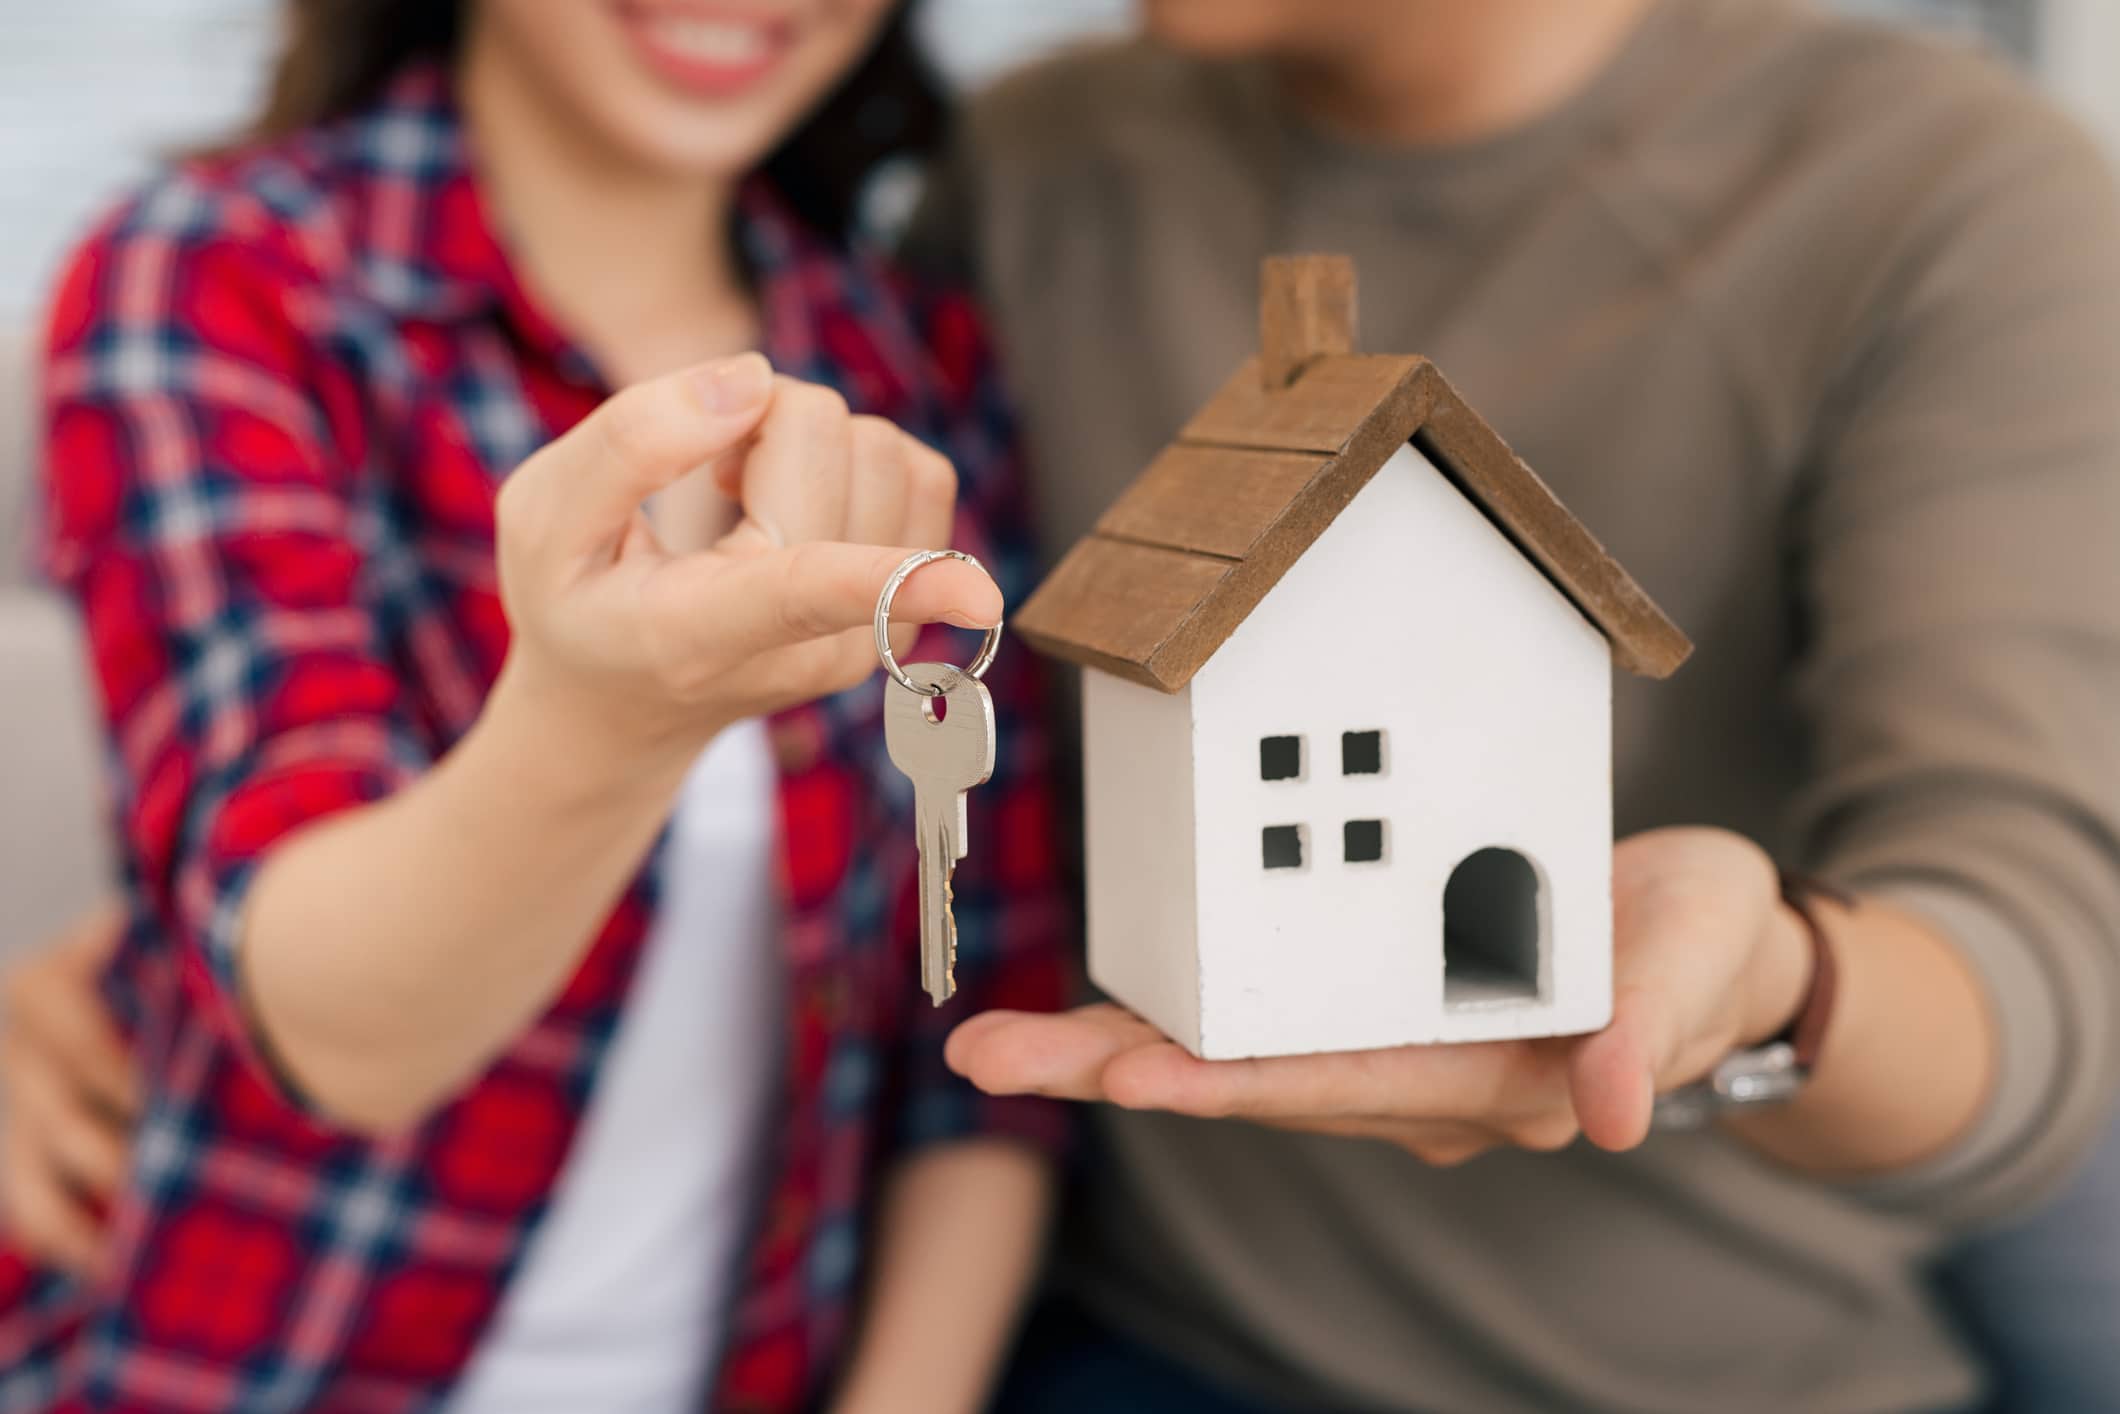 Proud couple holding keys and wooden house figurine